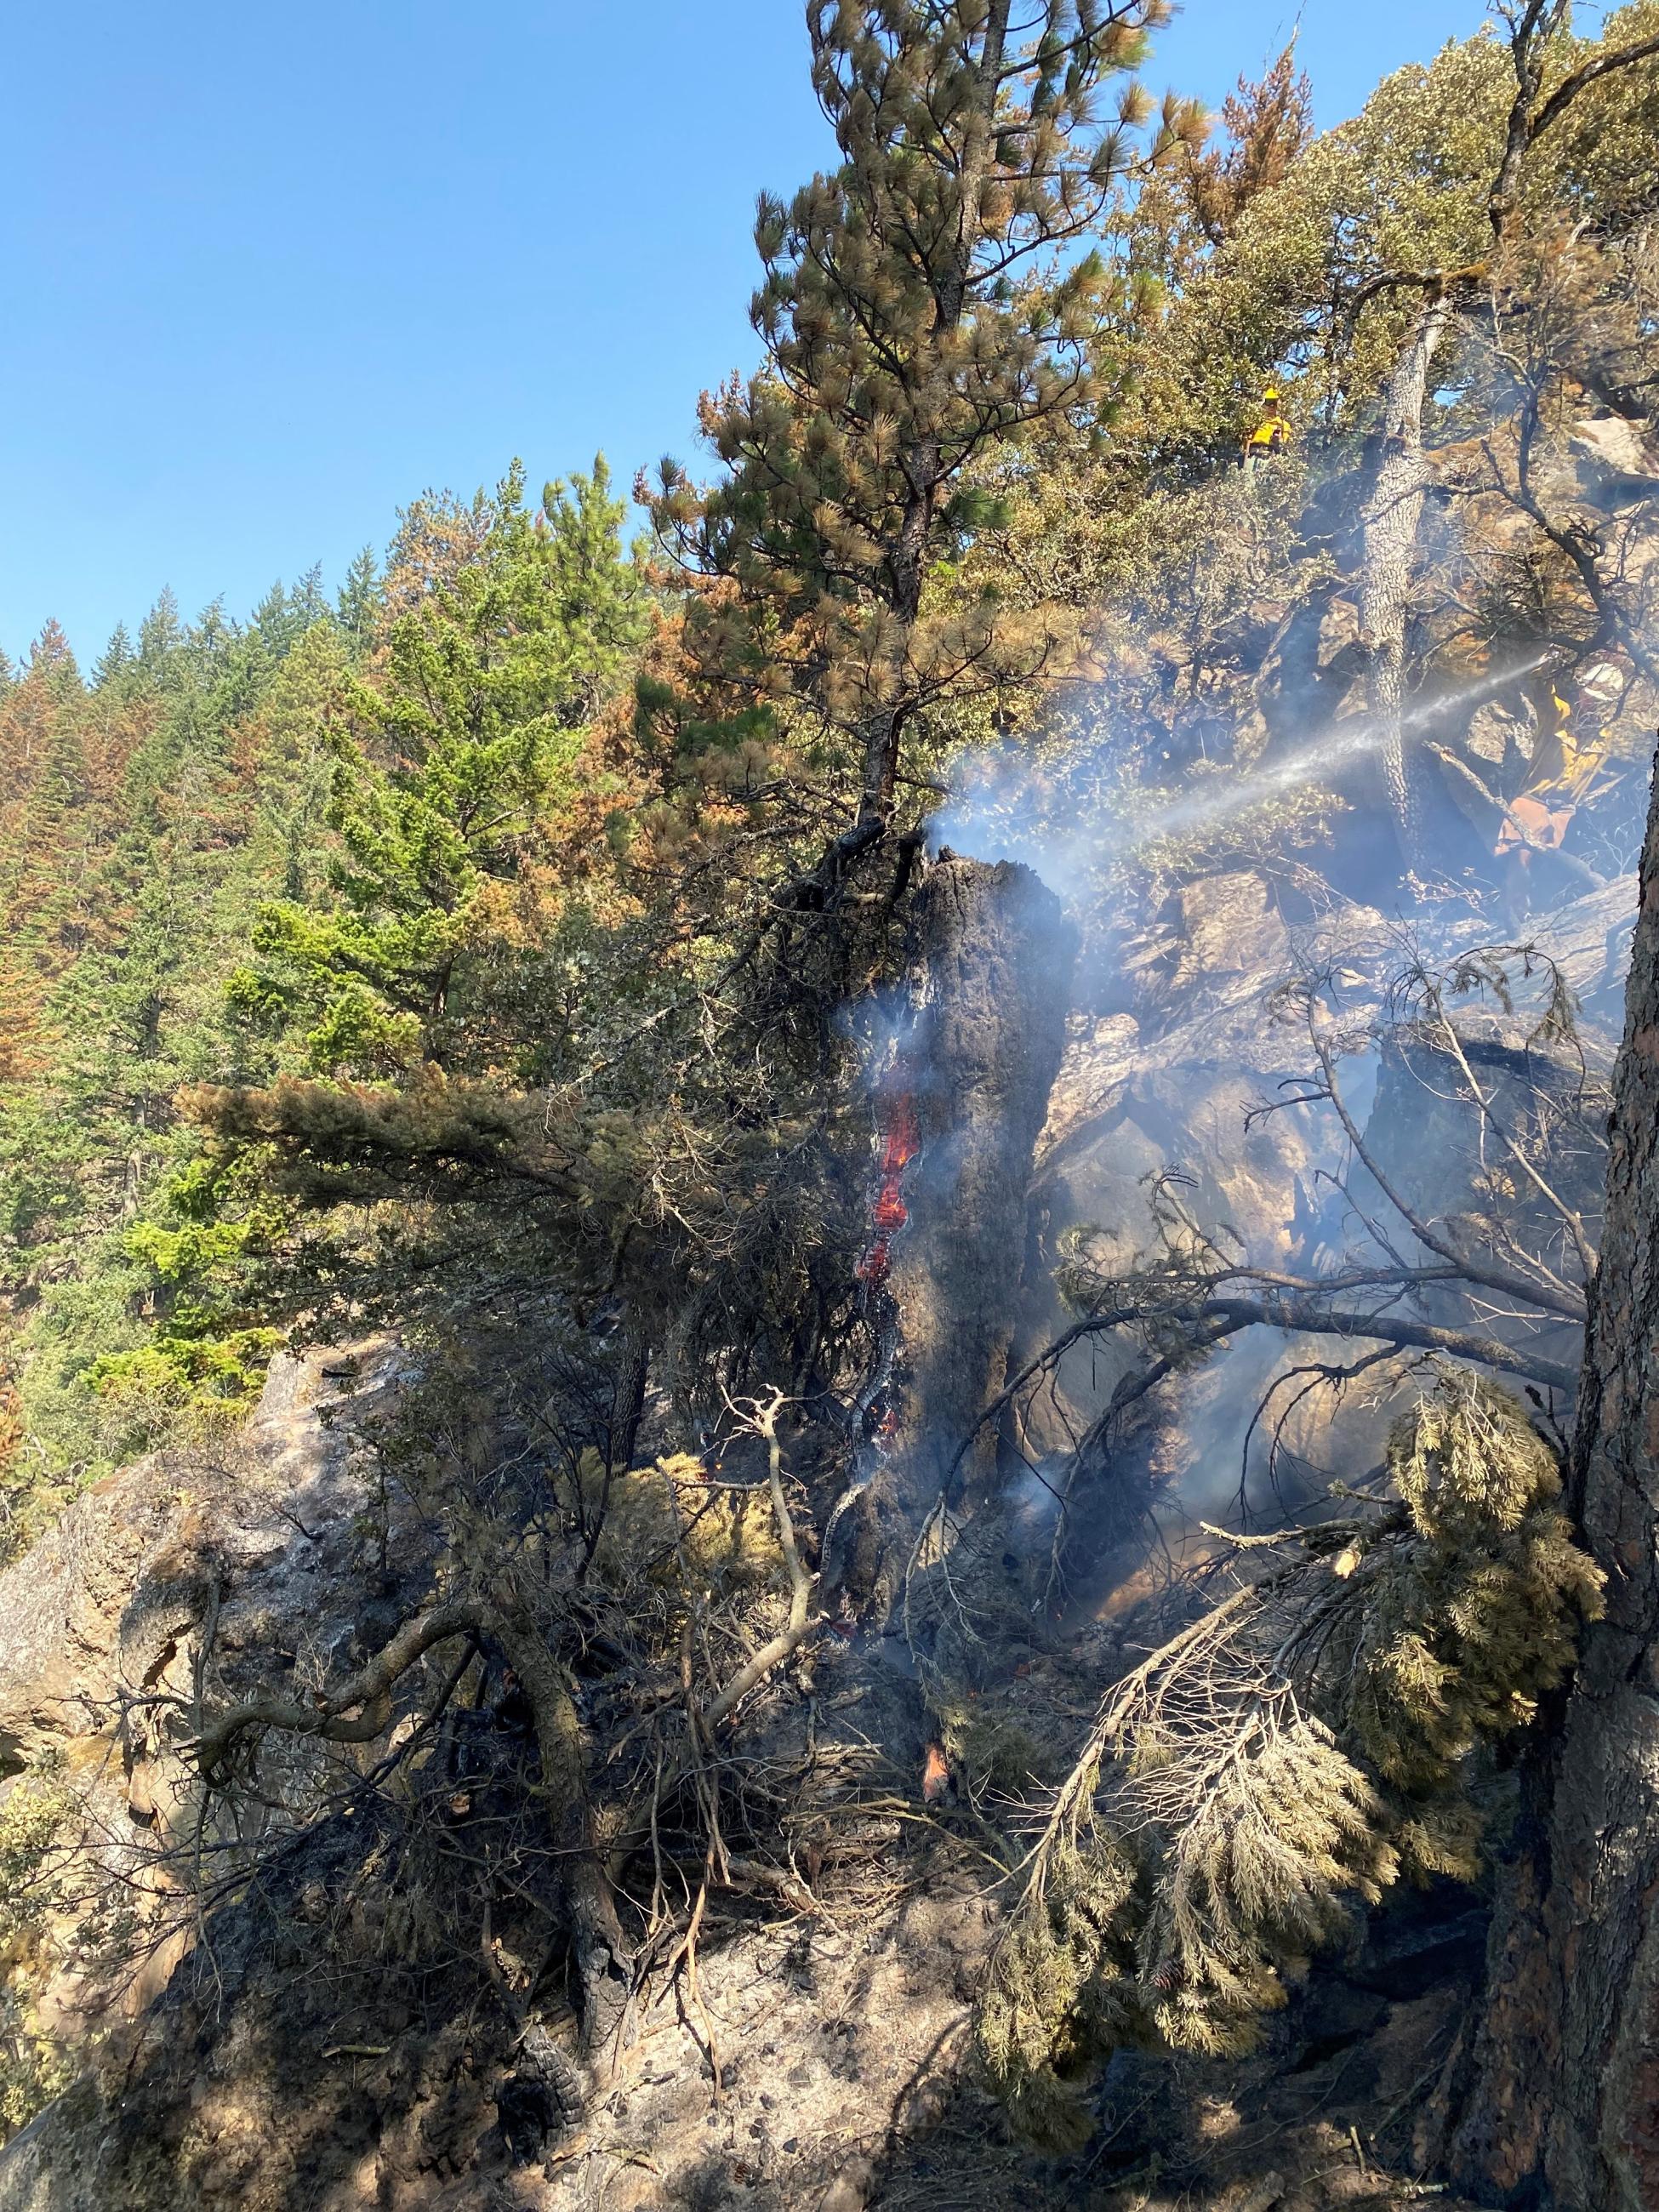 Firefighters working on a steep cliff to extinguish a burned out tree on a steep cliff.